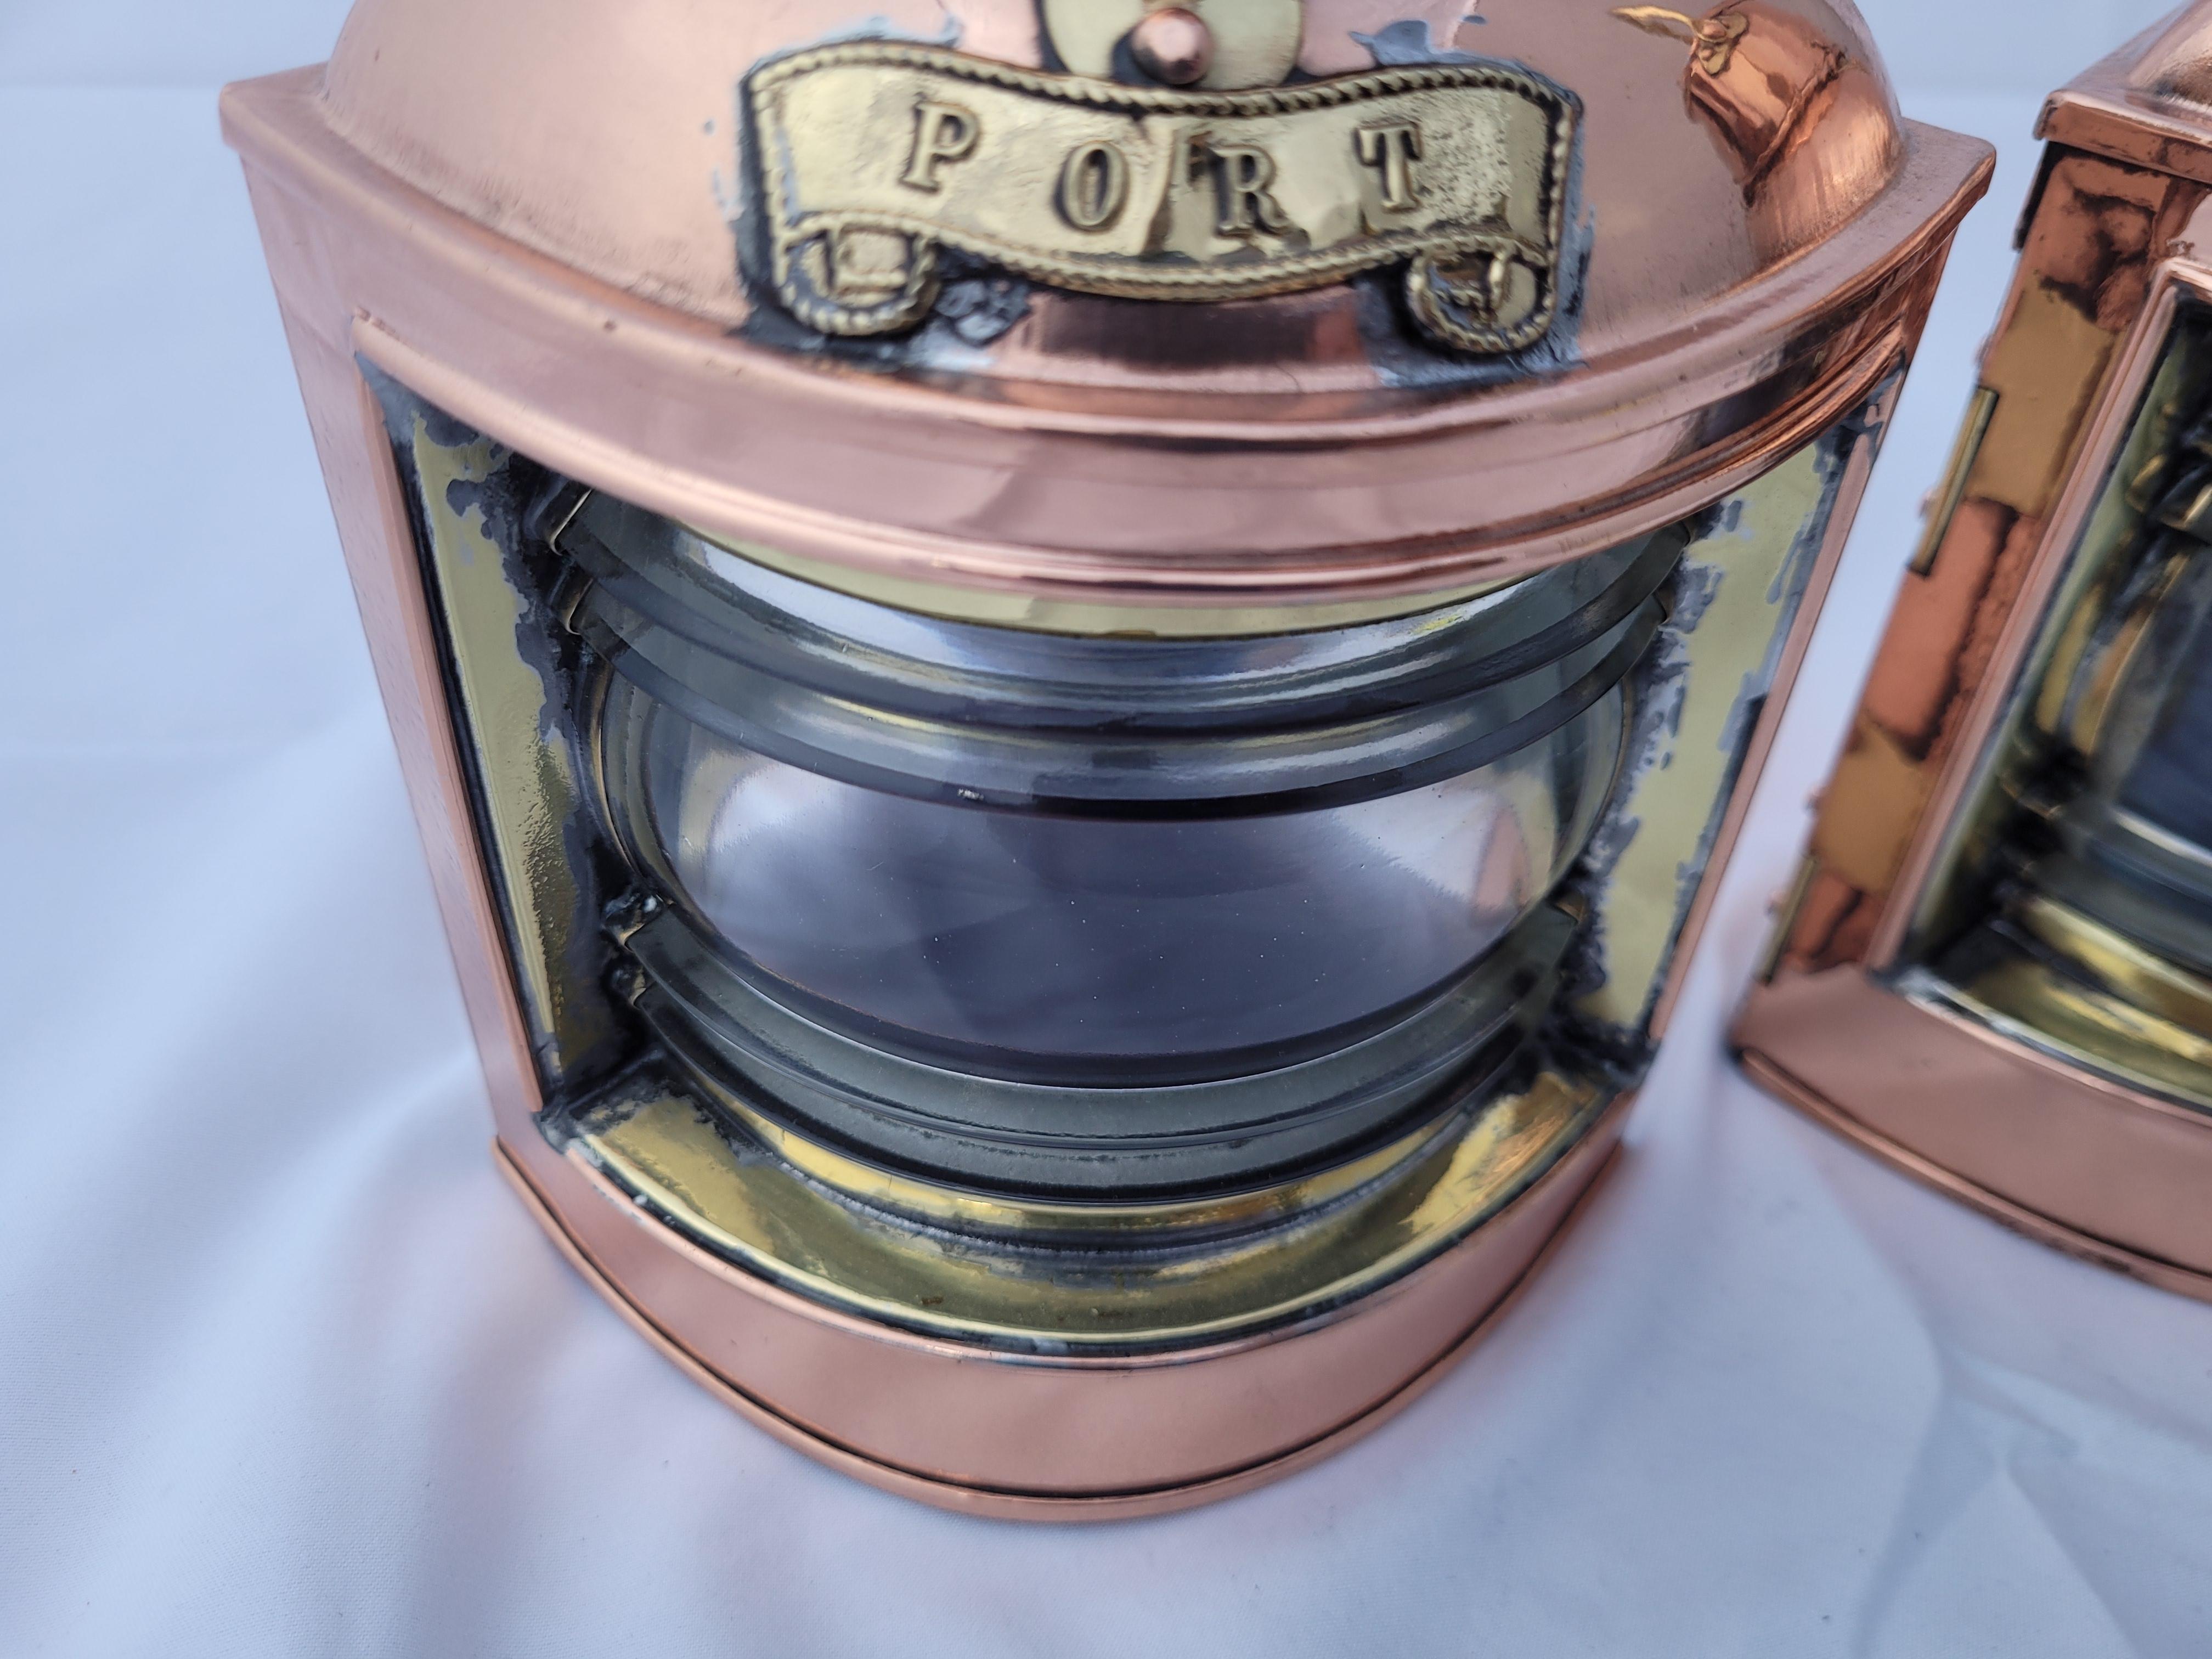 North American Port and Starboard Ship Lanterns For Sale